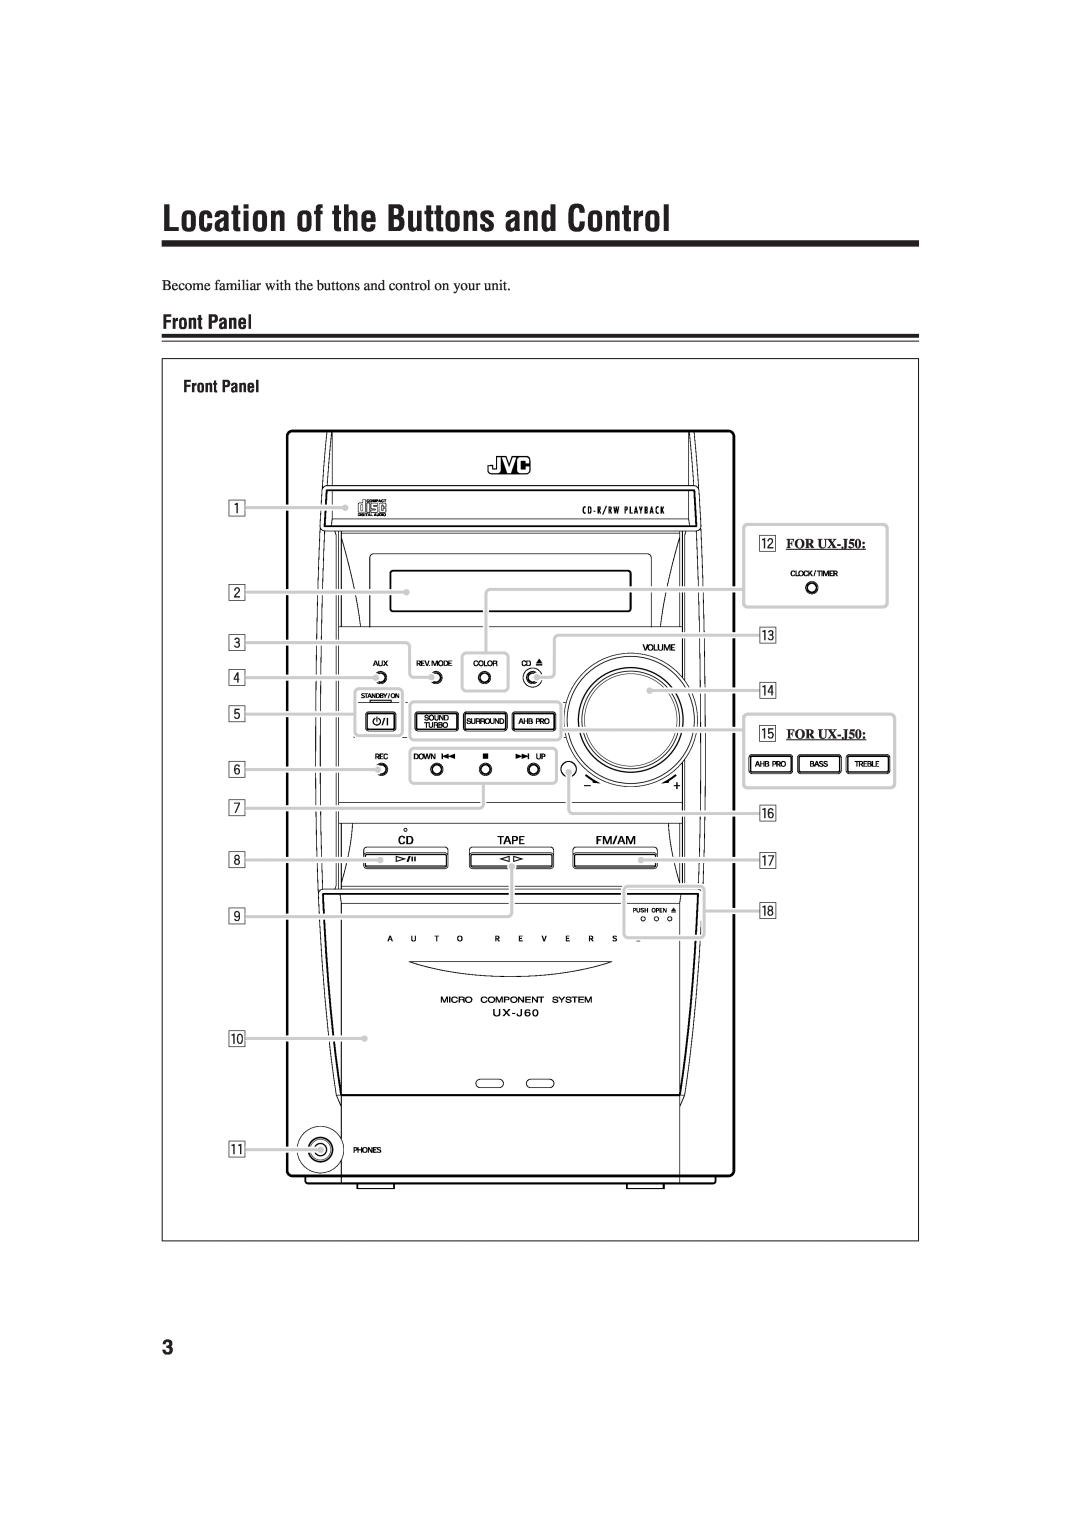 JVC UX-J60 manual Location of the Buttons and Control, Front Panel 